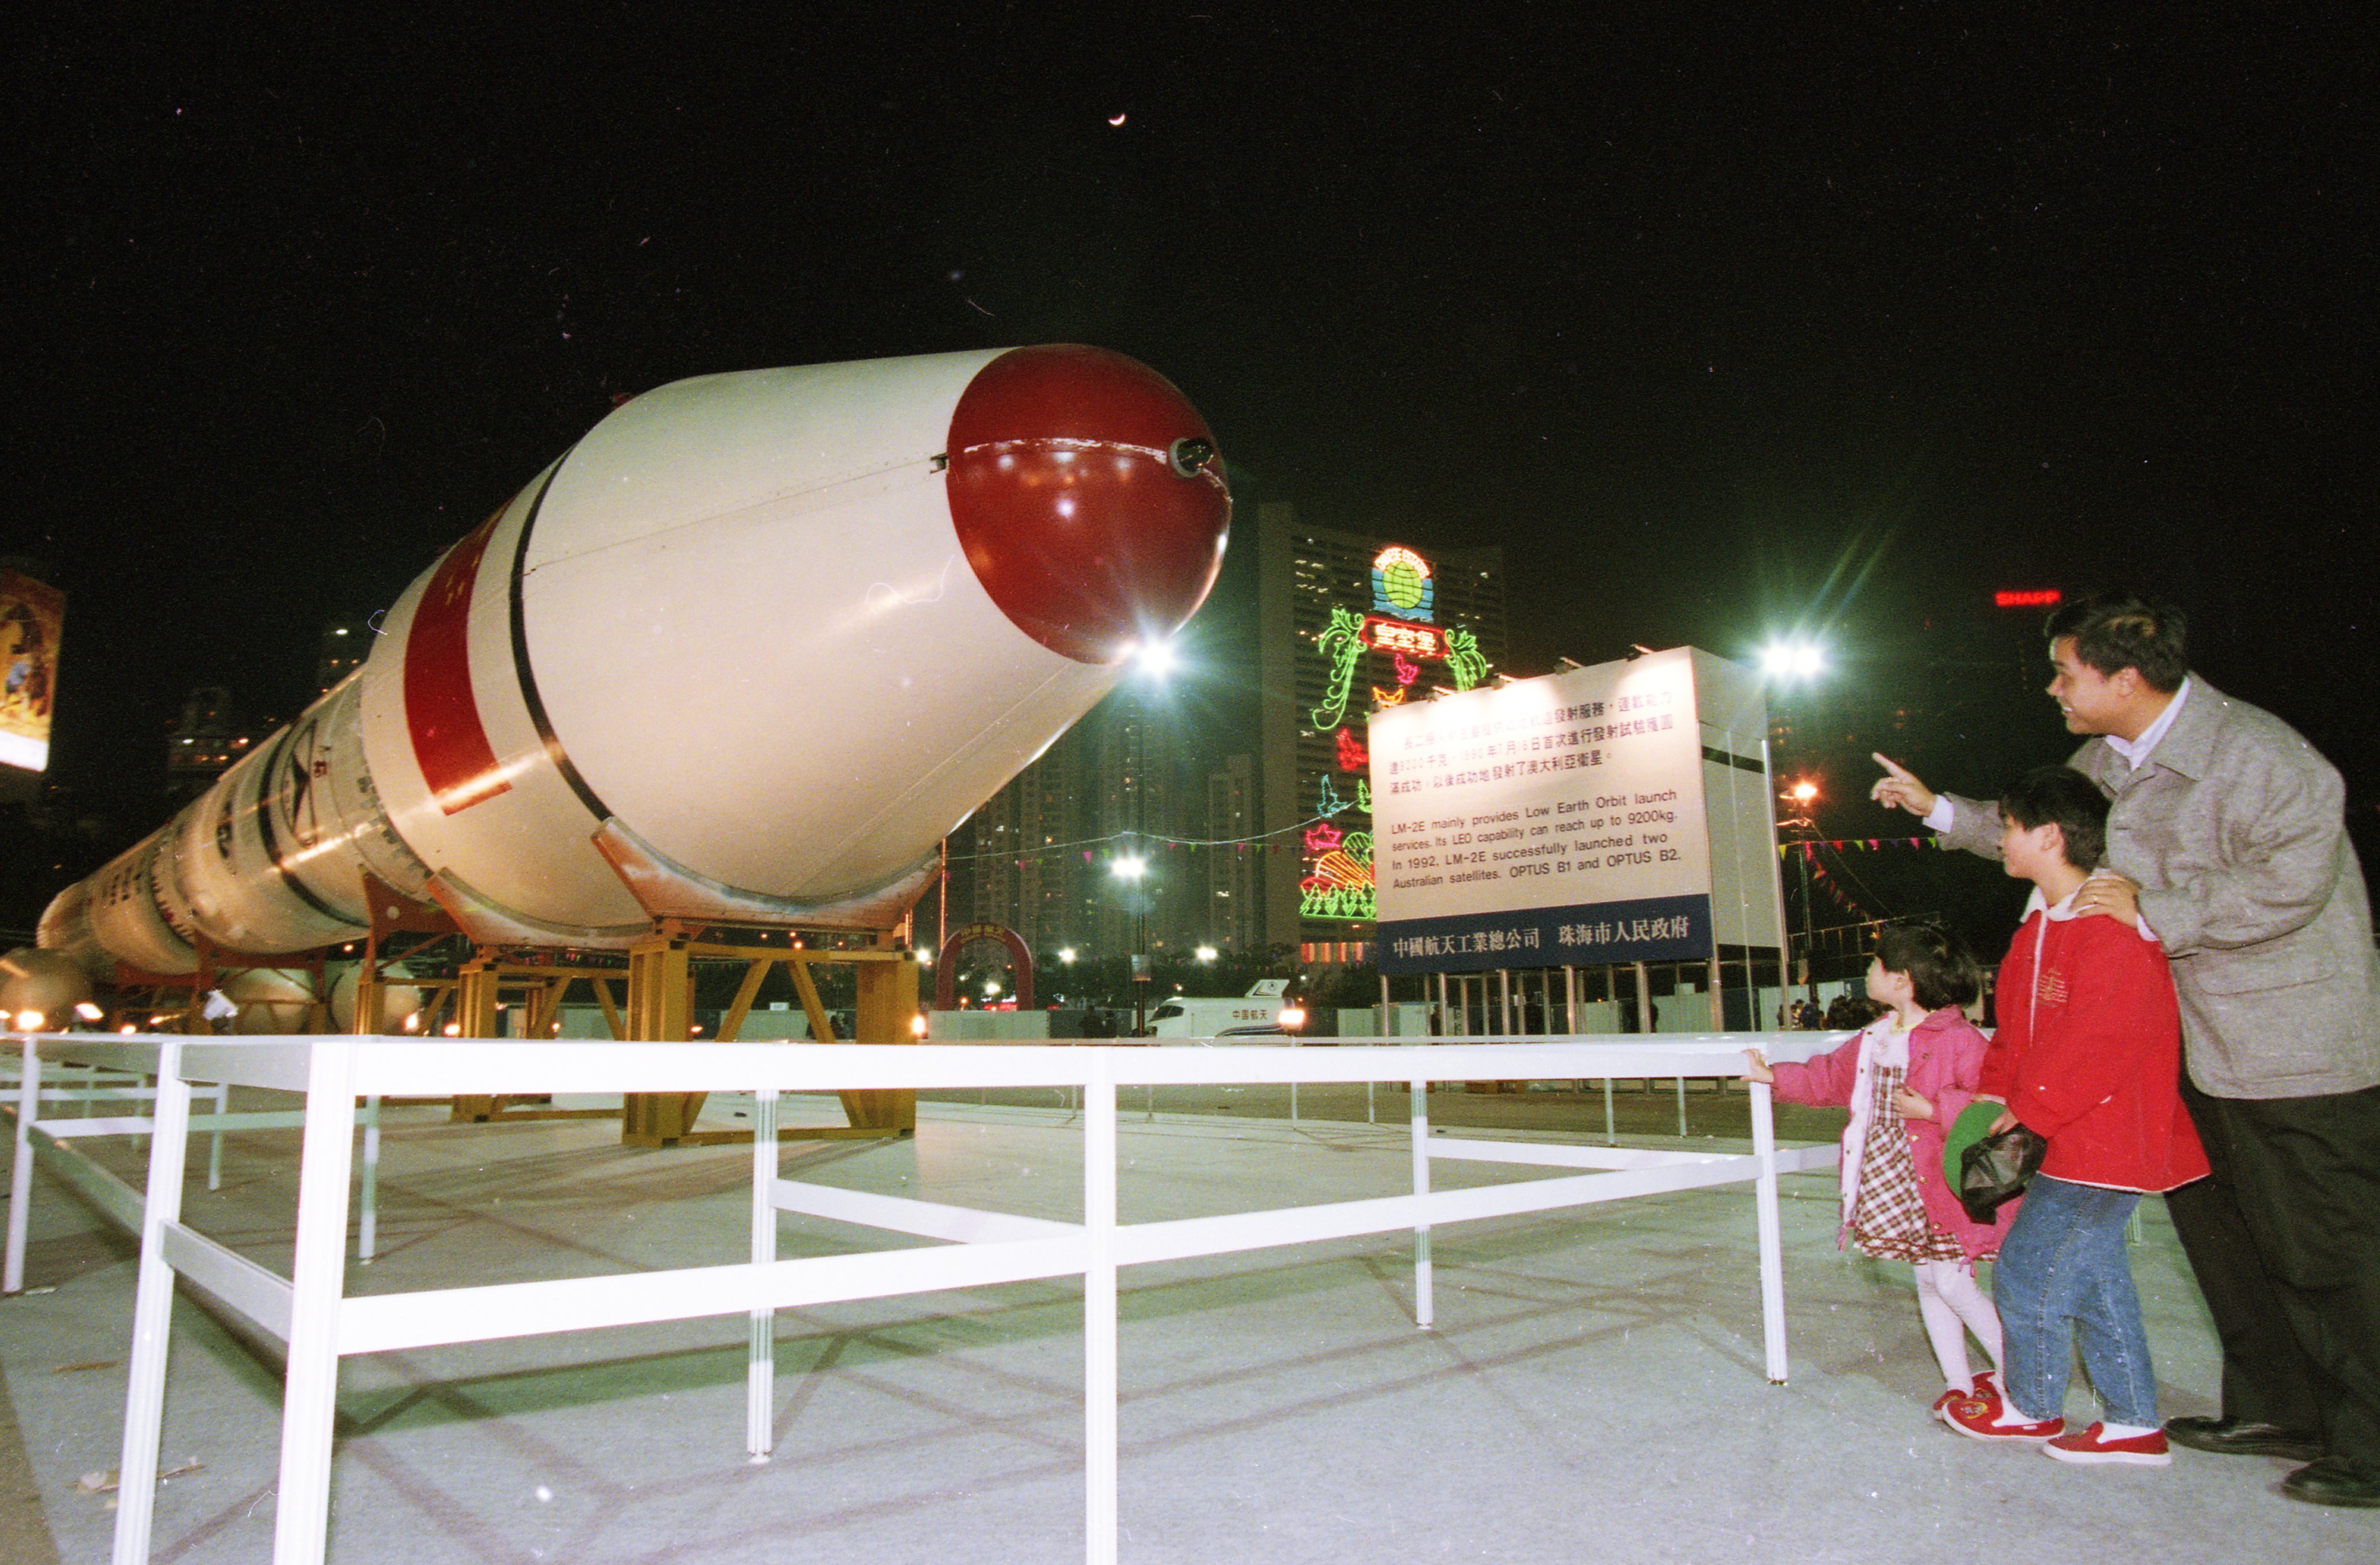 A Chinese Long March rocket on display in Hong Kong’s Victoria Park. Photo: Dustin Shum